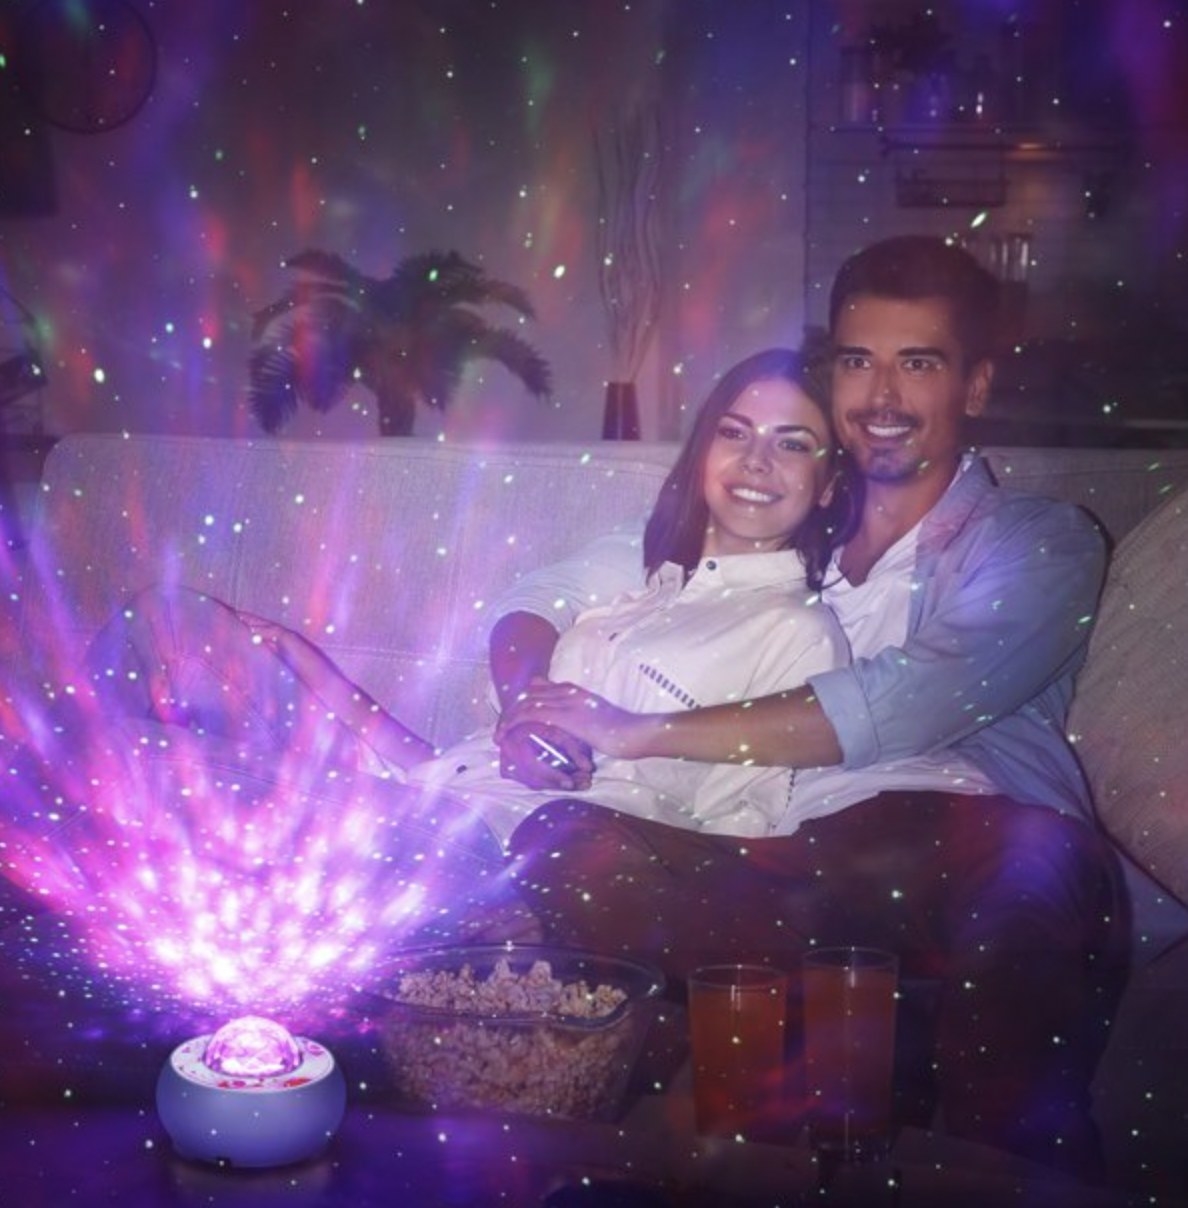 The projector emitting purple celestial light while a couple relaxes on couch together